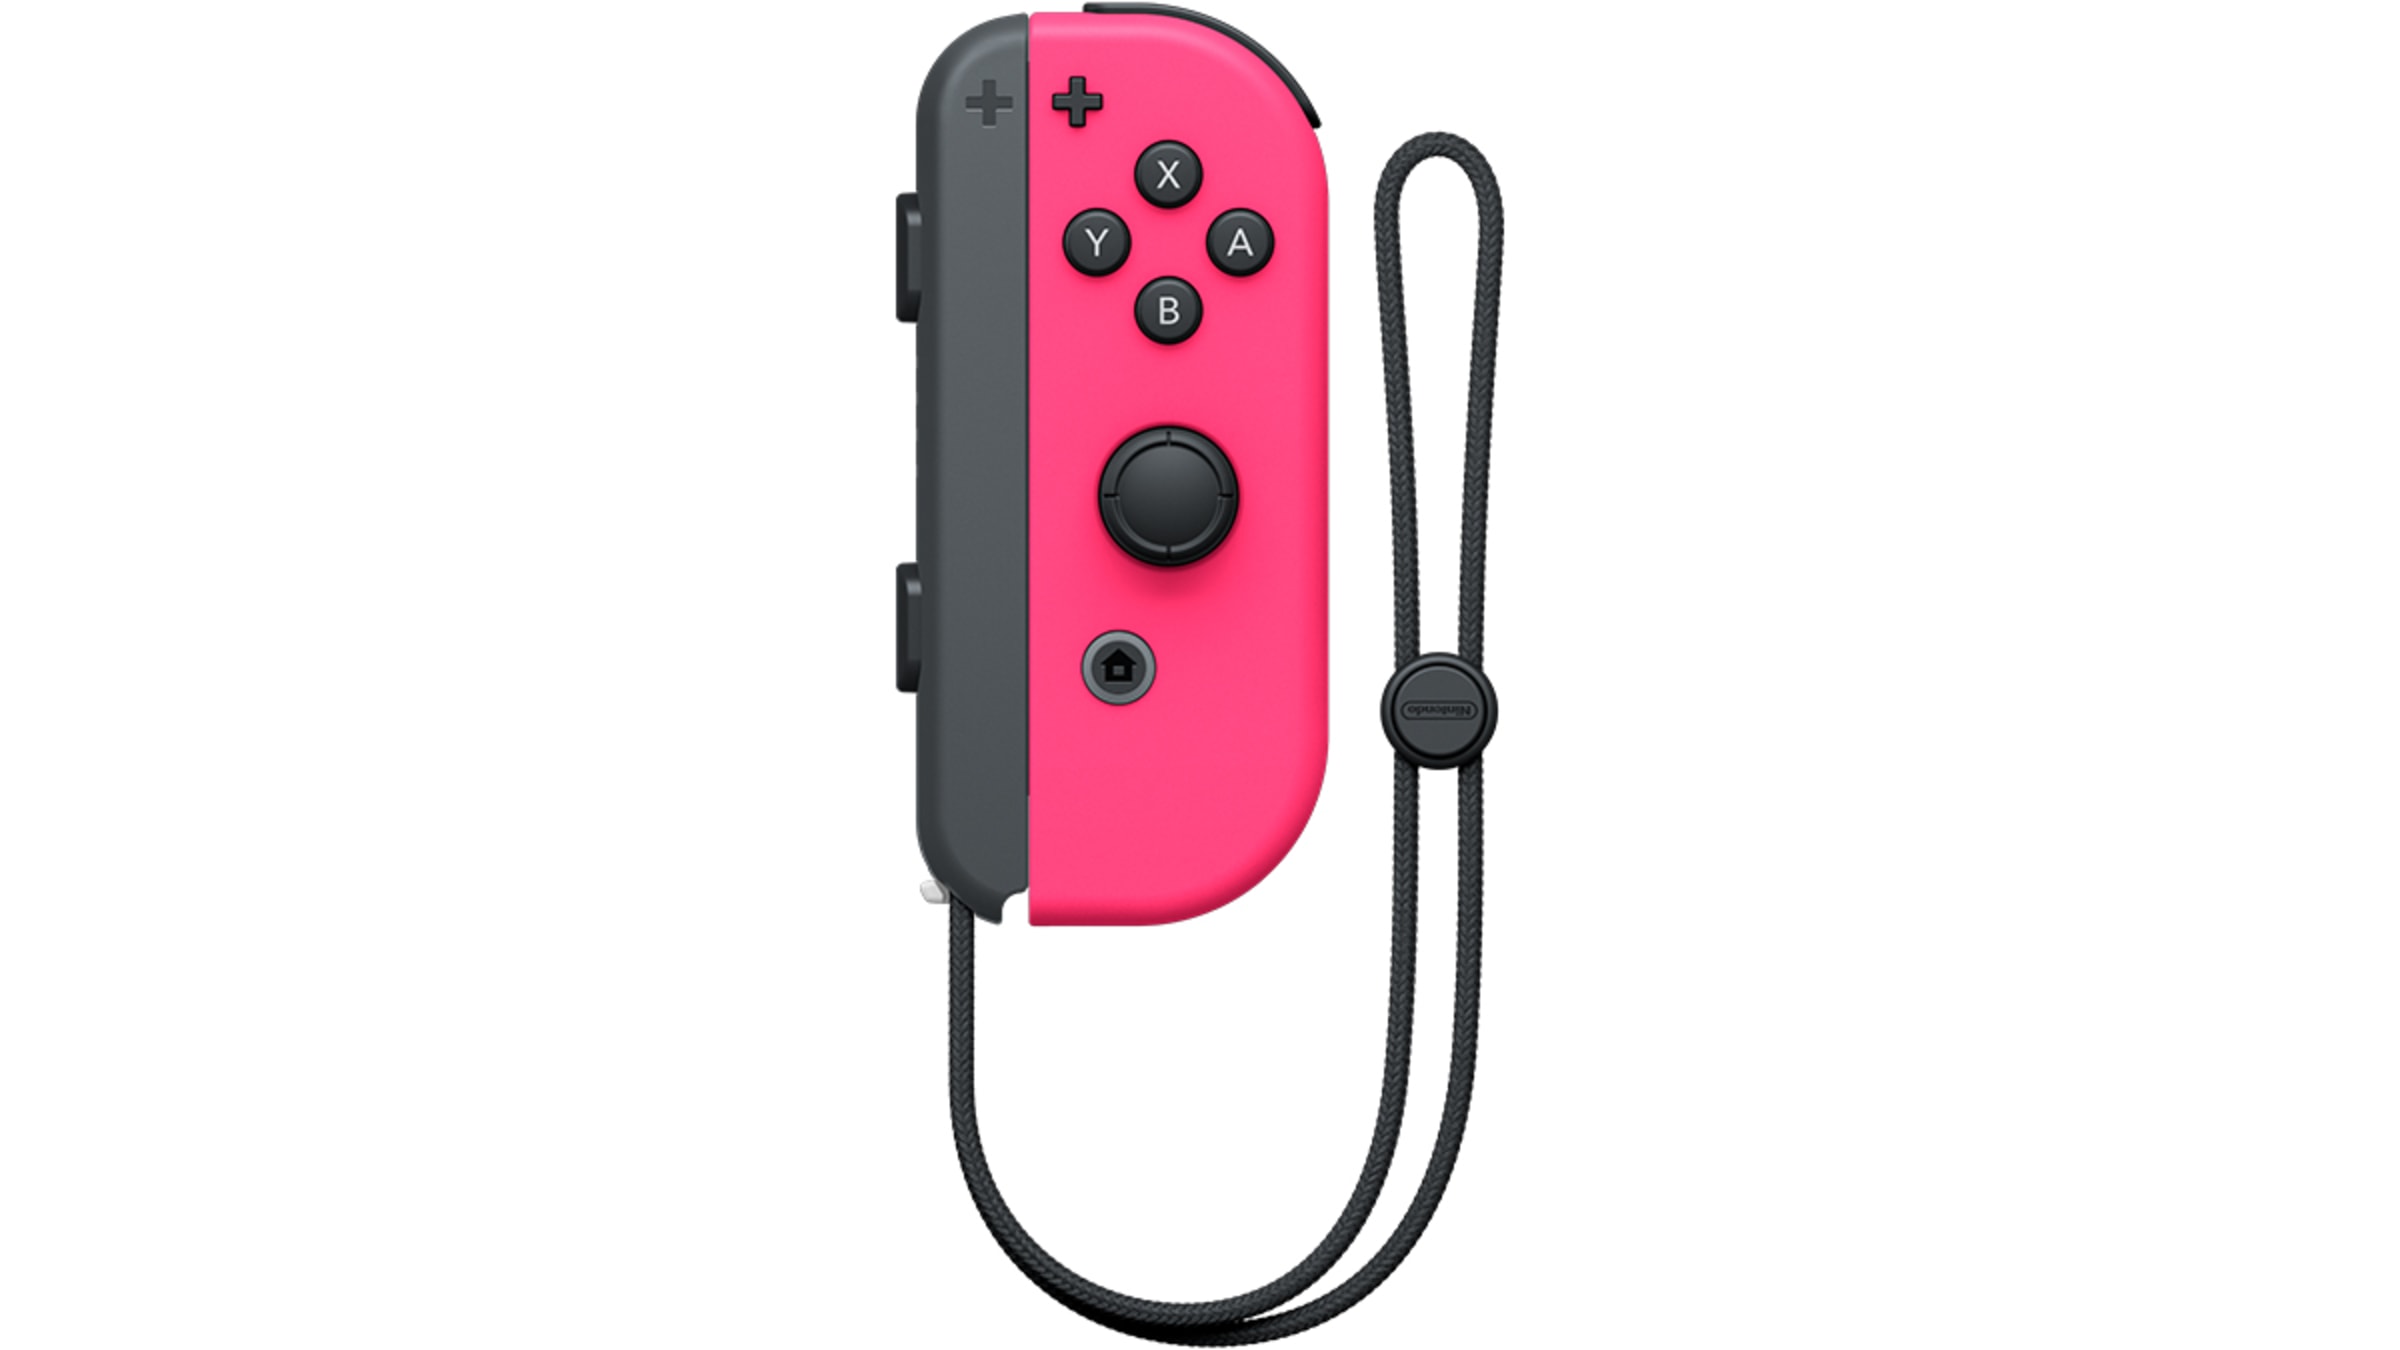 New pink Joy-Con on the way from Nintendo!